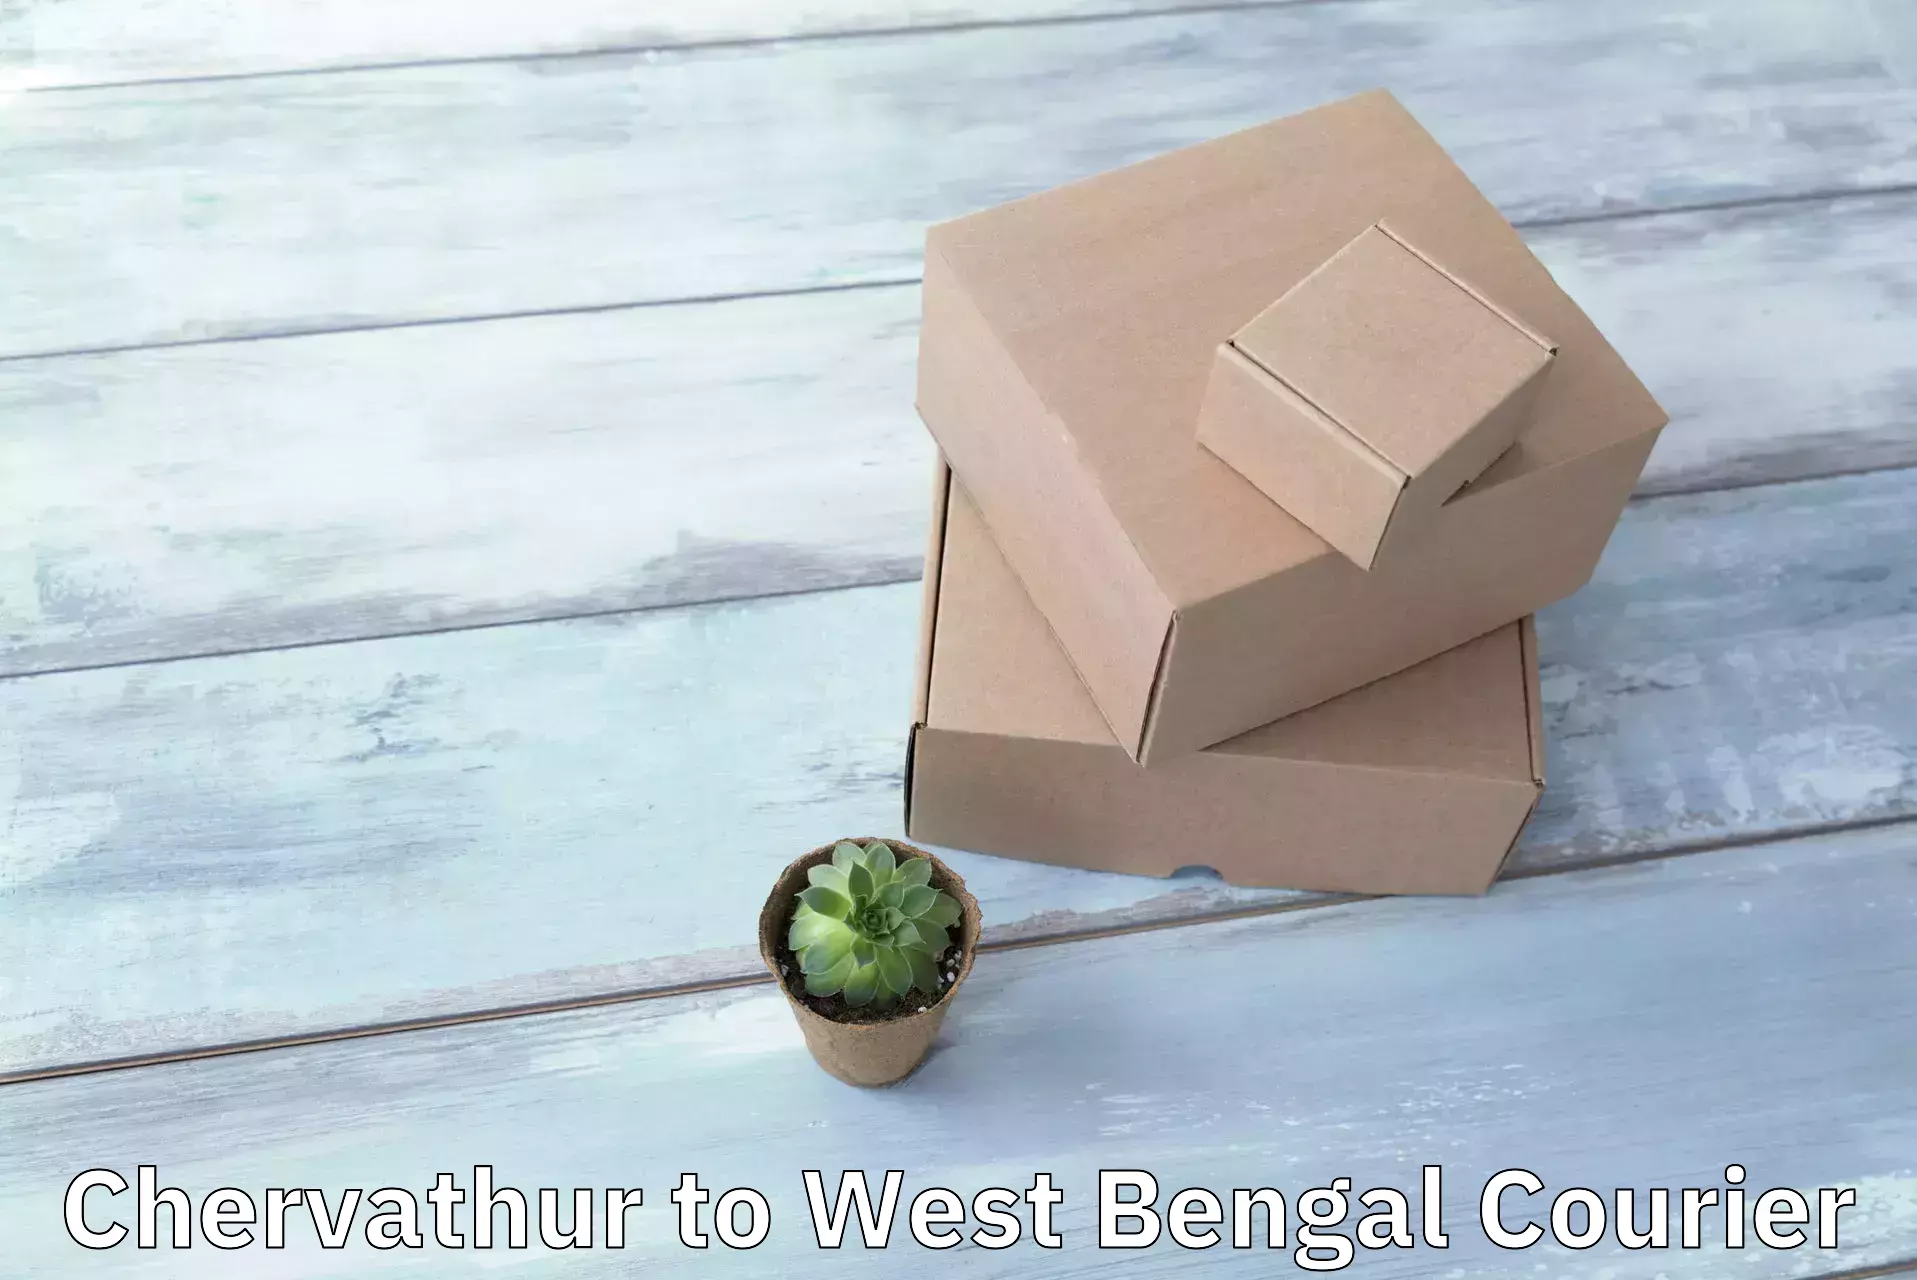 Small business couriers in Chervathur to Kolkata Port